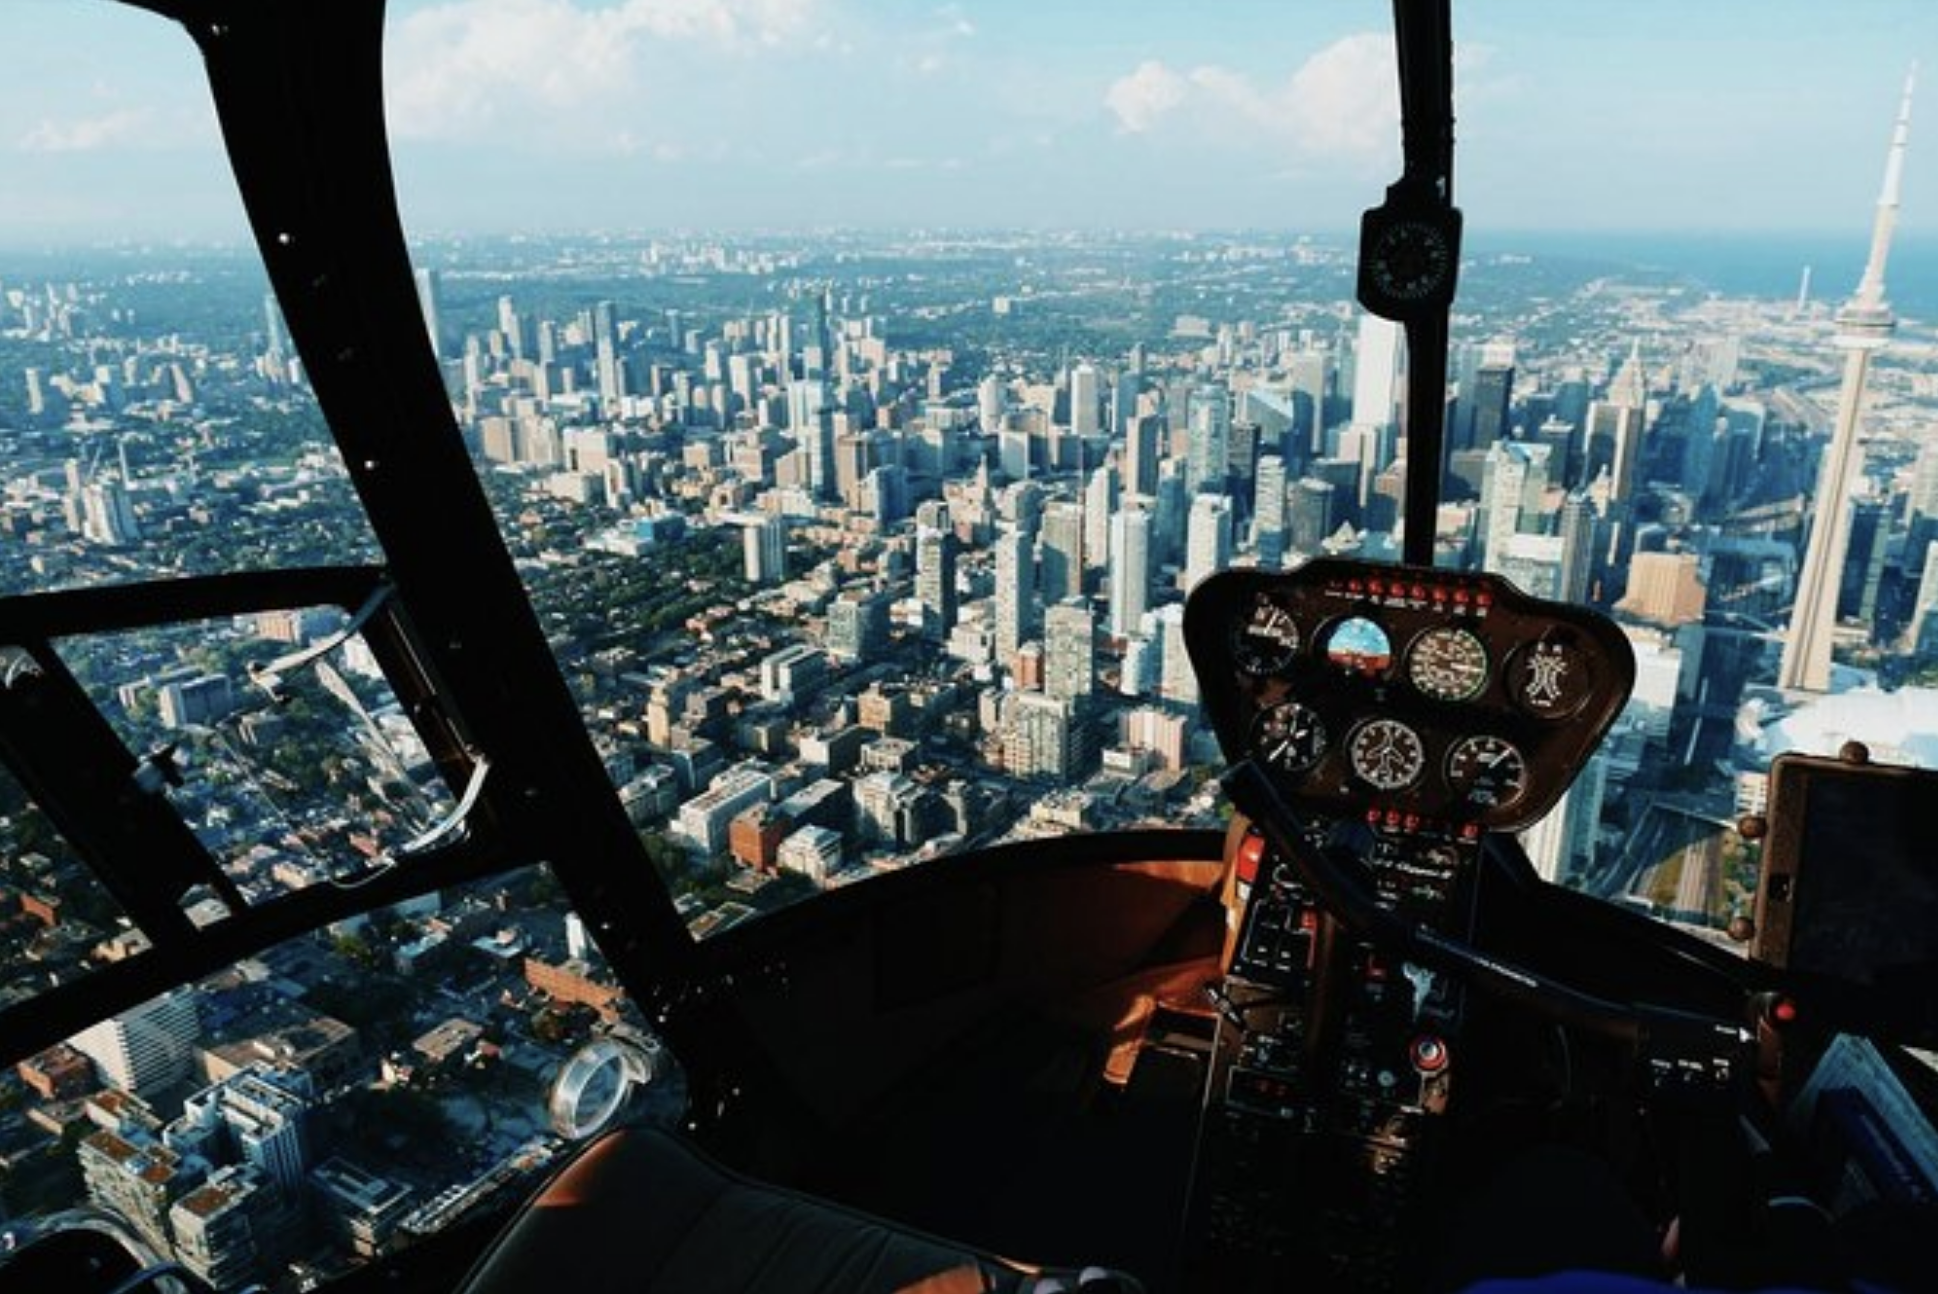 3. 7-Minute Helicopter Tour over Toronto